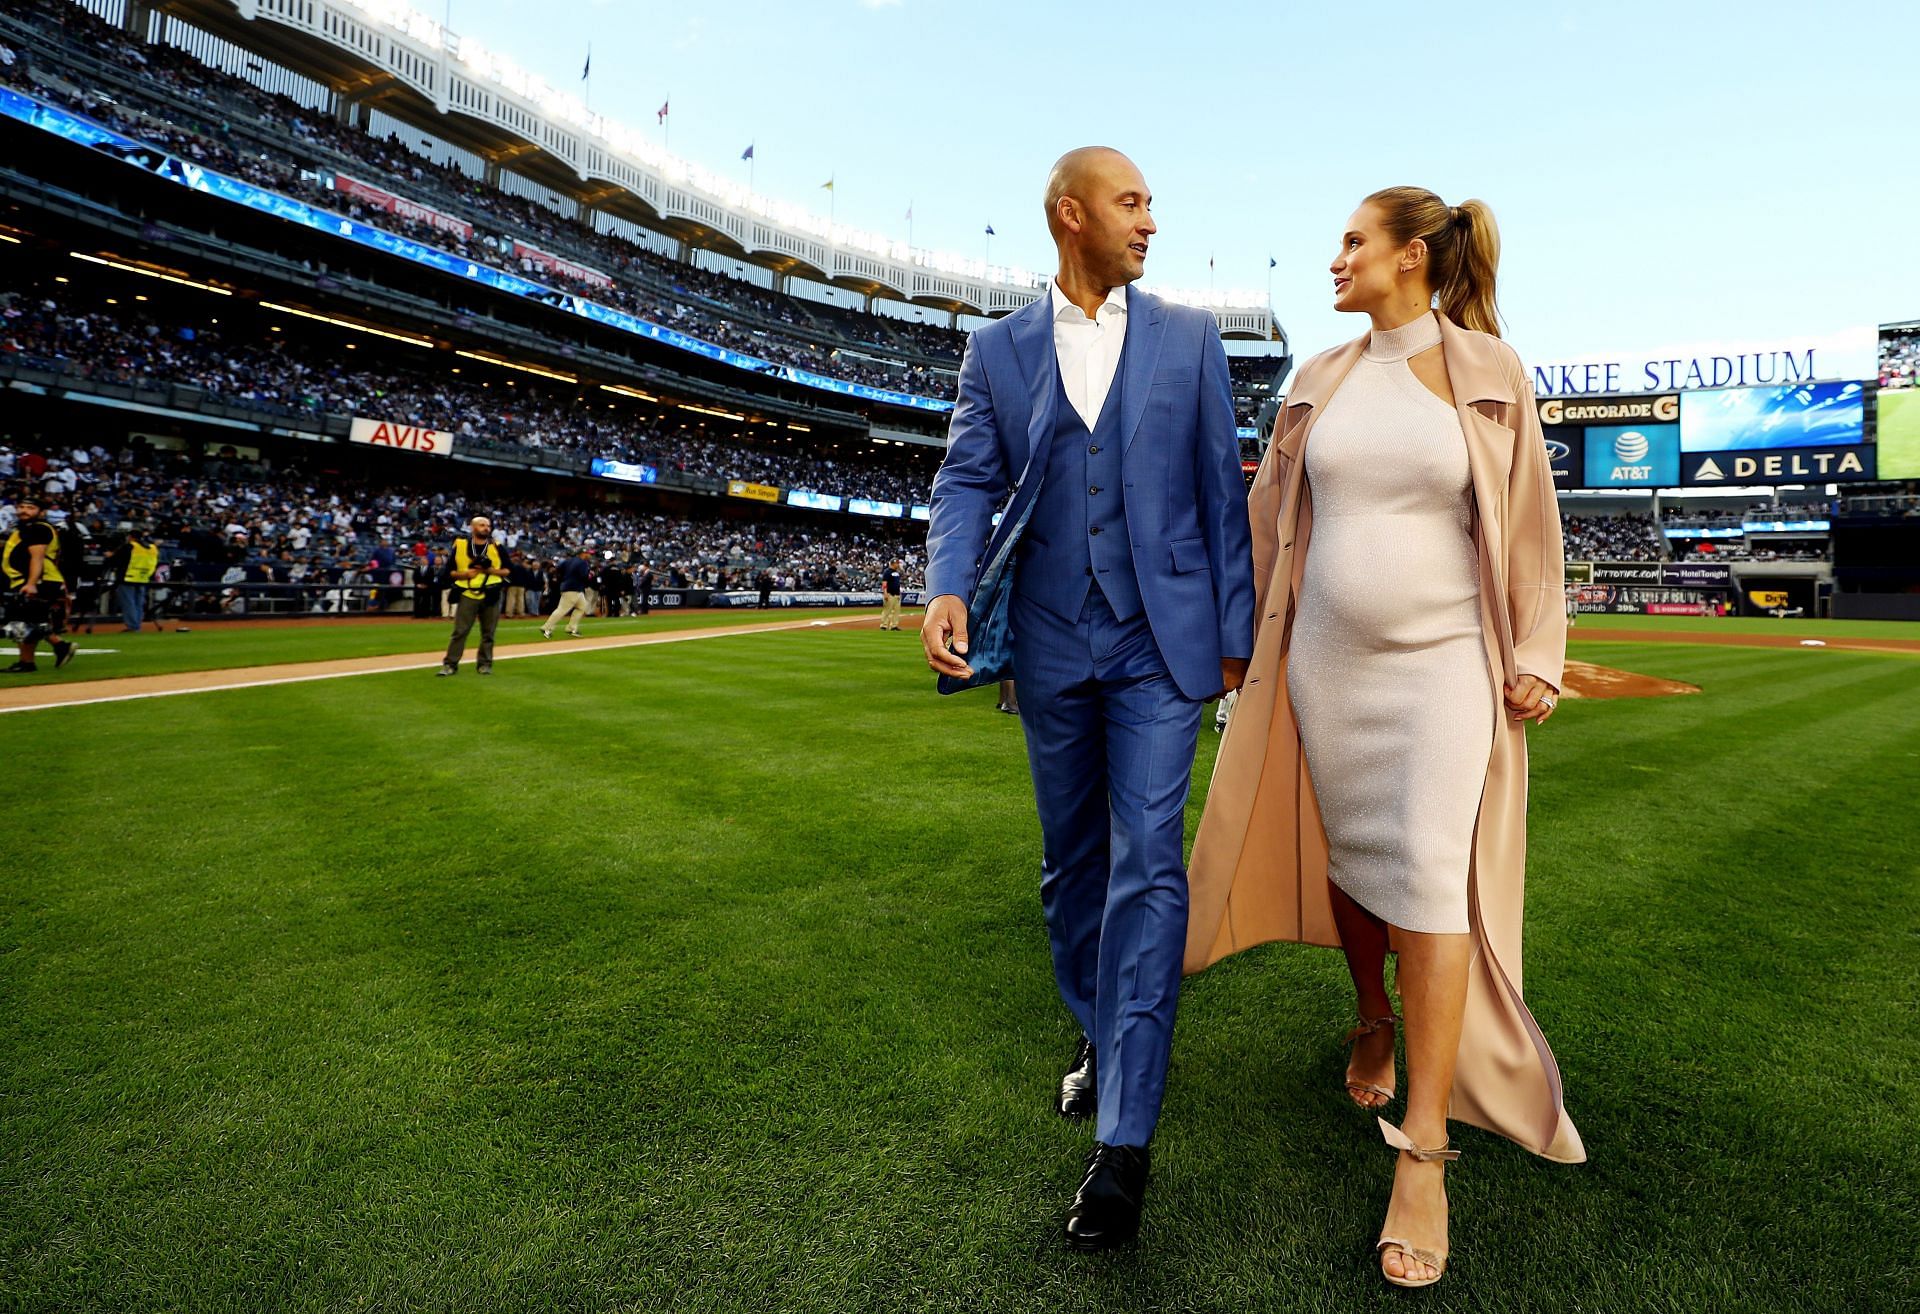 Derek Jeter Ceremony: NEW YORK, NY - MAY 14: Derek and his Wife Hannah Davis walk off the field after the retirement ceremony of Derek&#039;s number 2 jersey at Yankee Stadium on May 14, 2017 in New York City. (Photo by Al Bello/Getty Images)